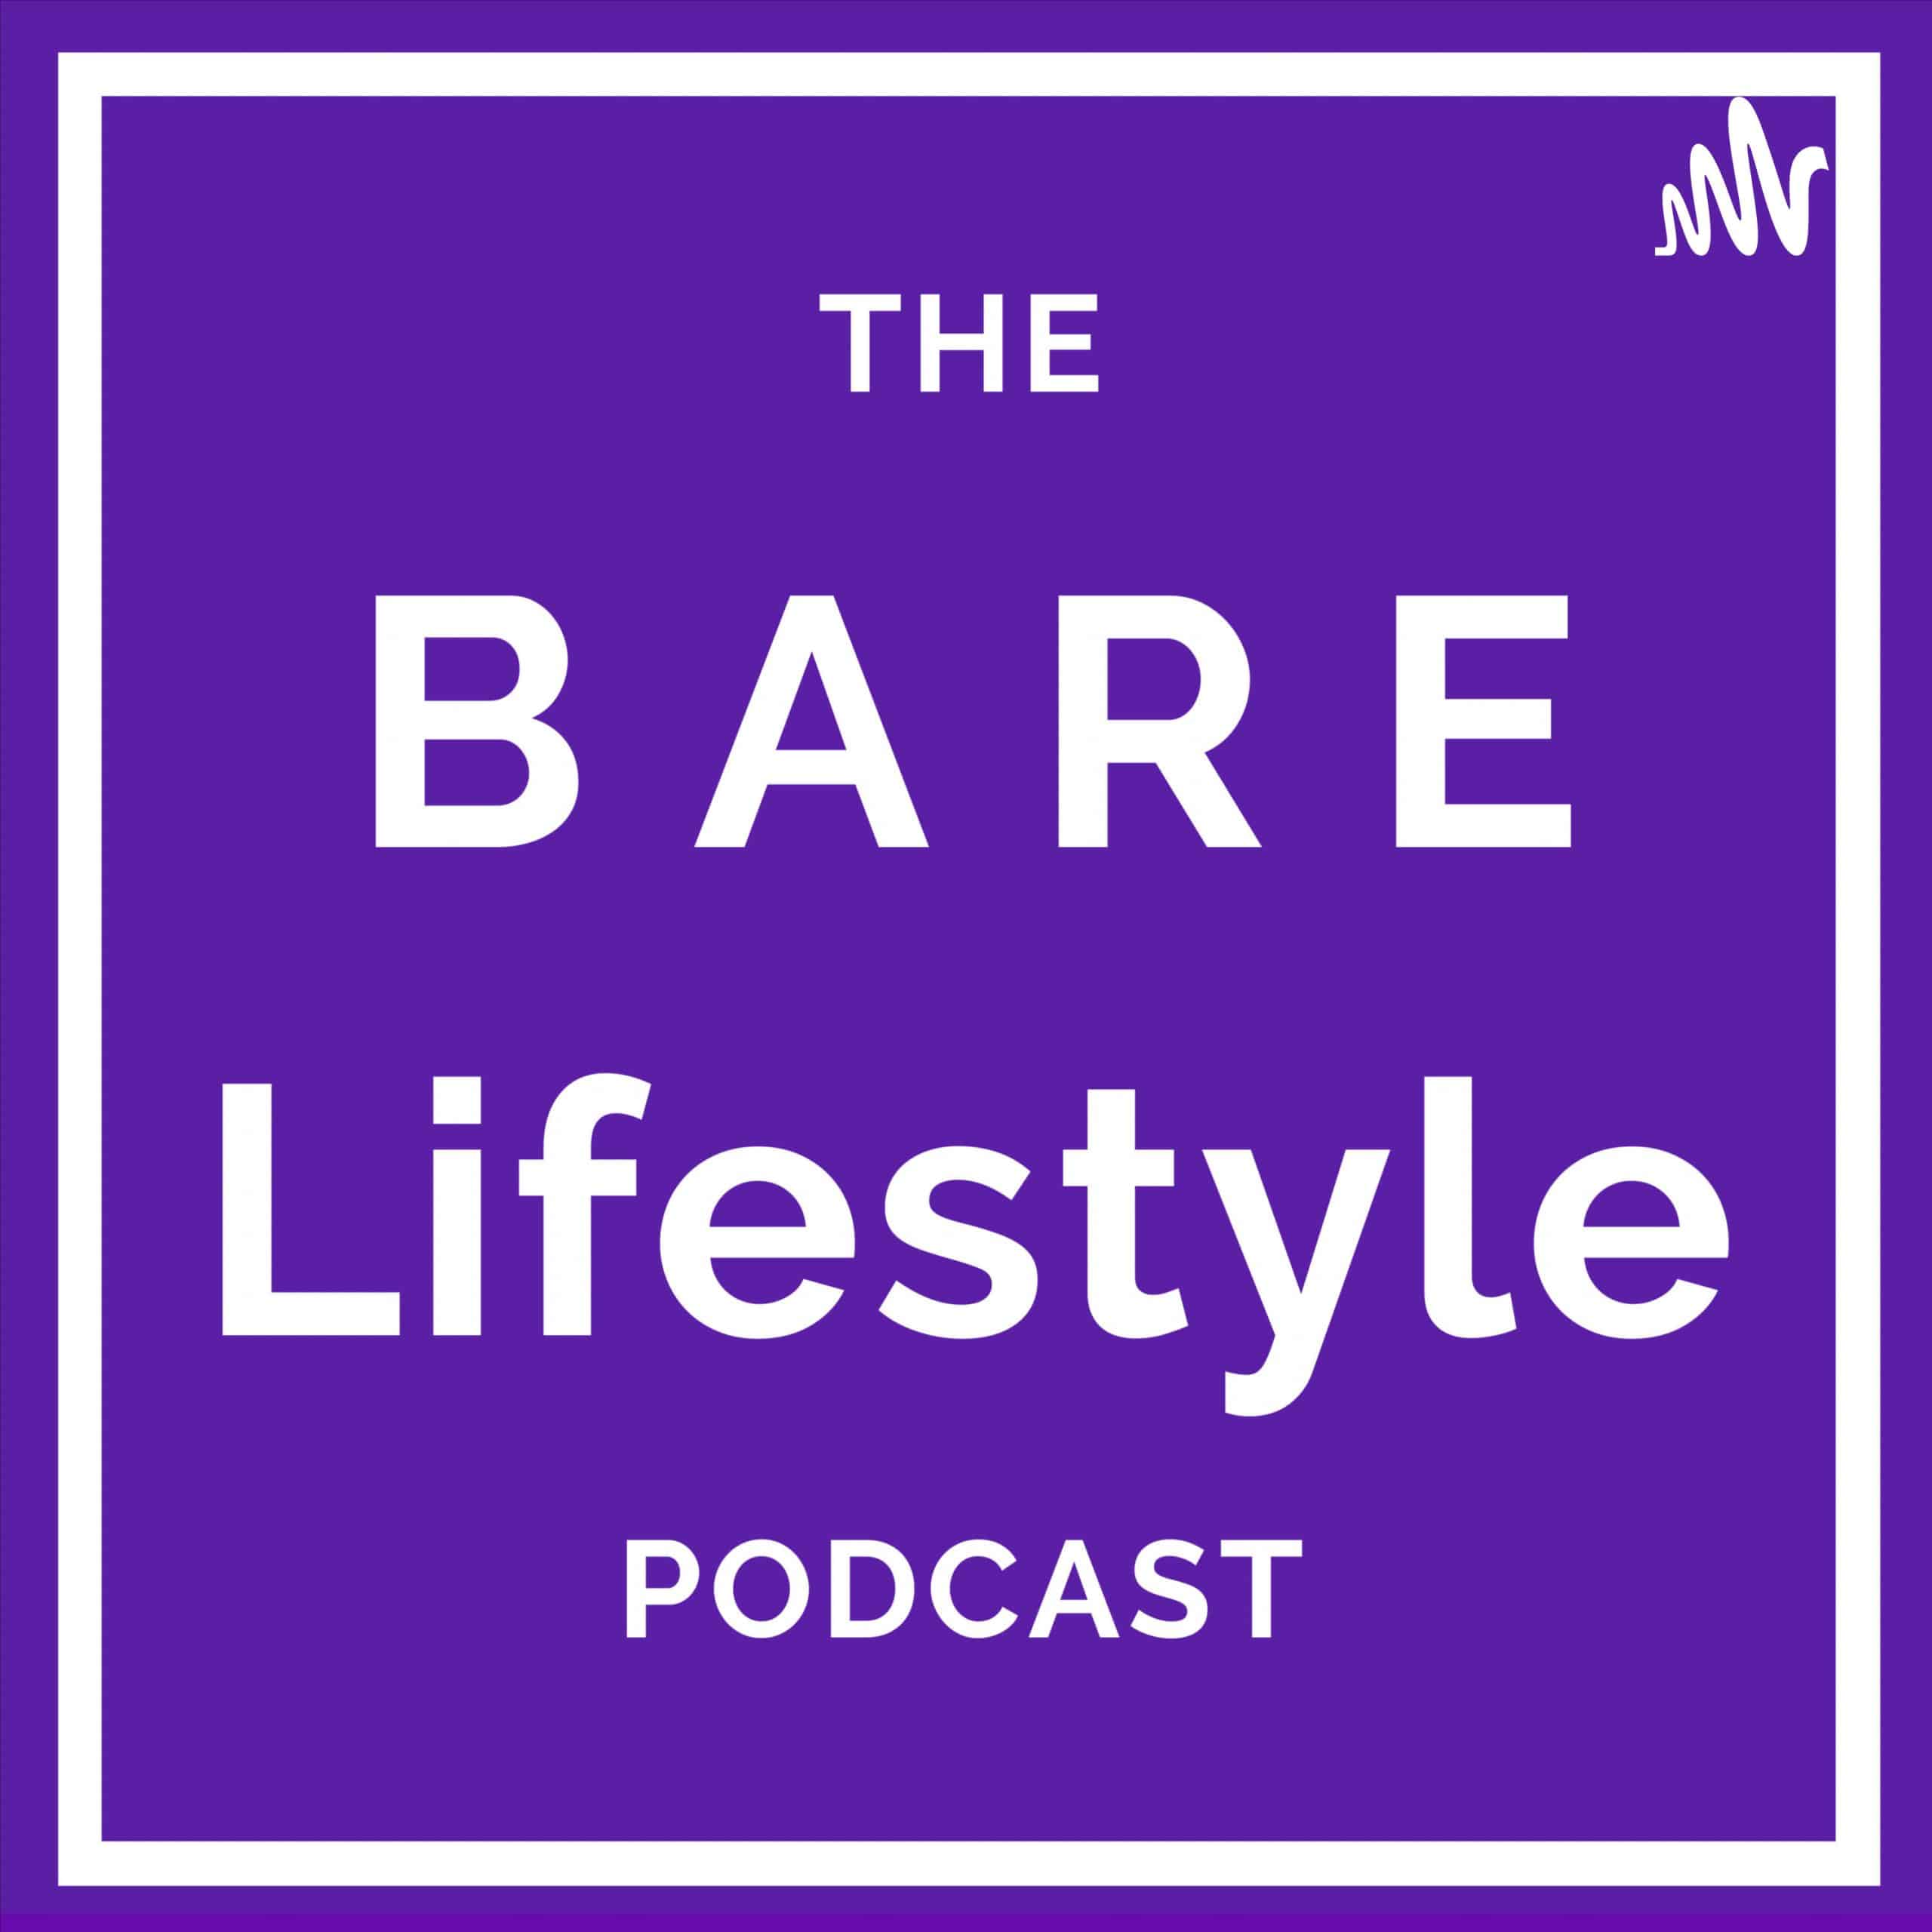 The bare lifestyle podcast